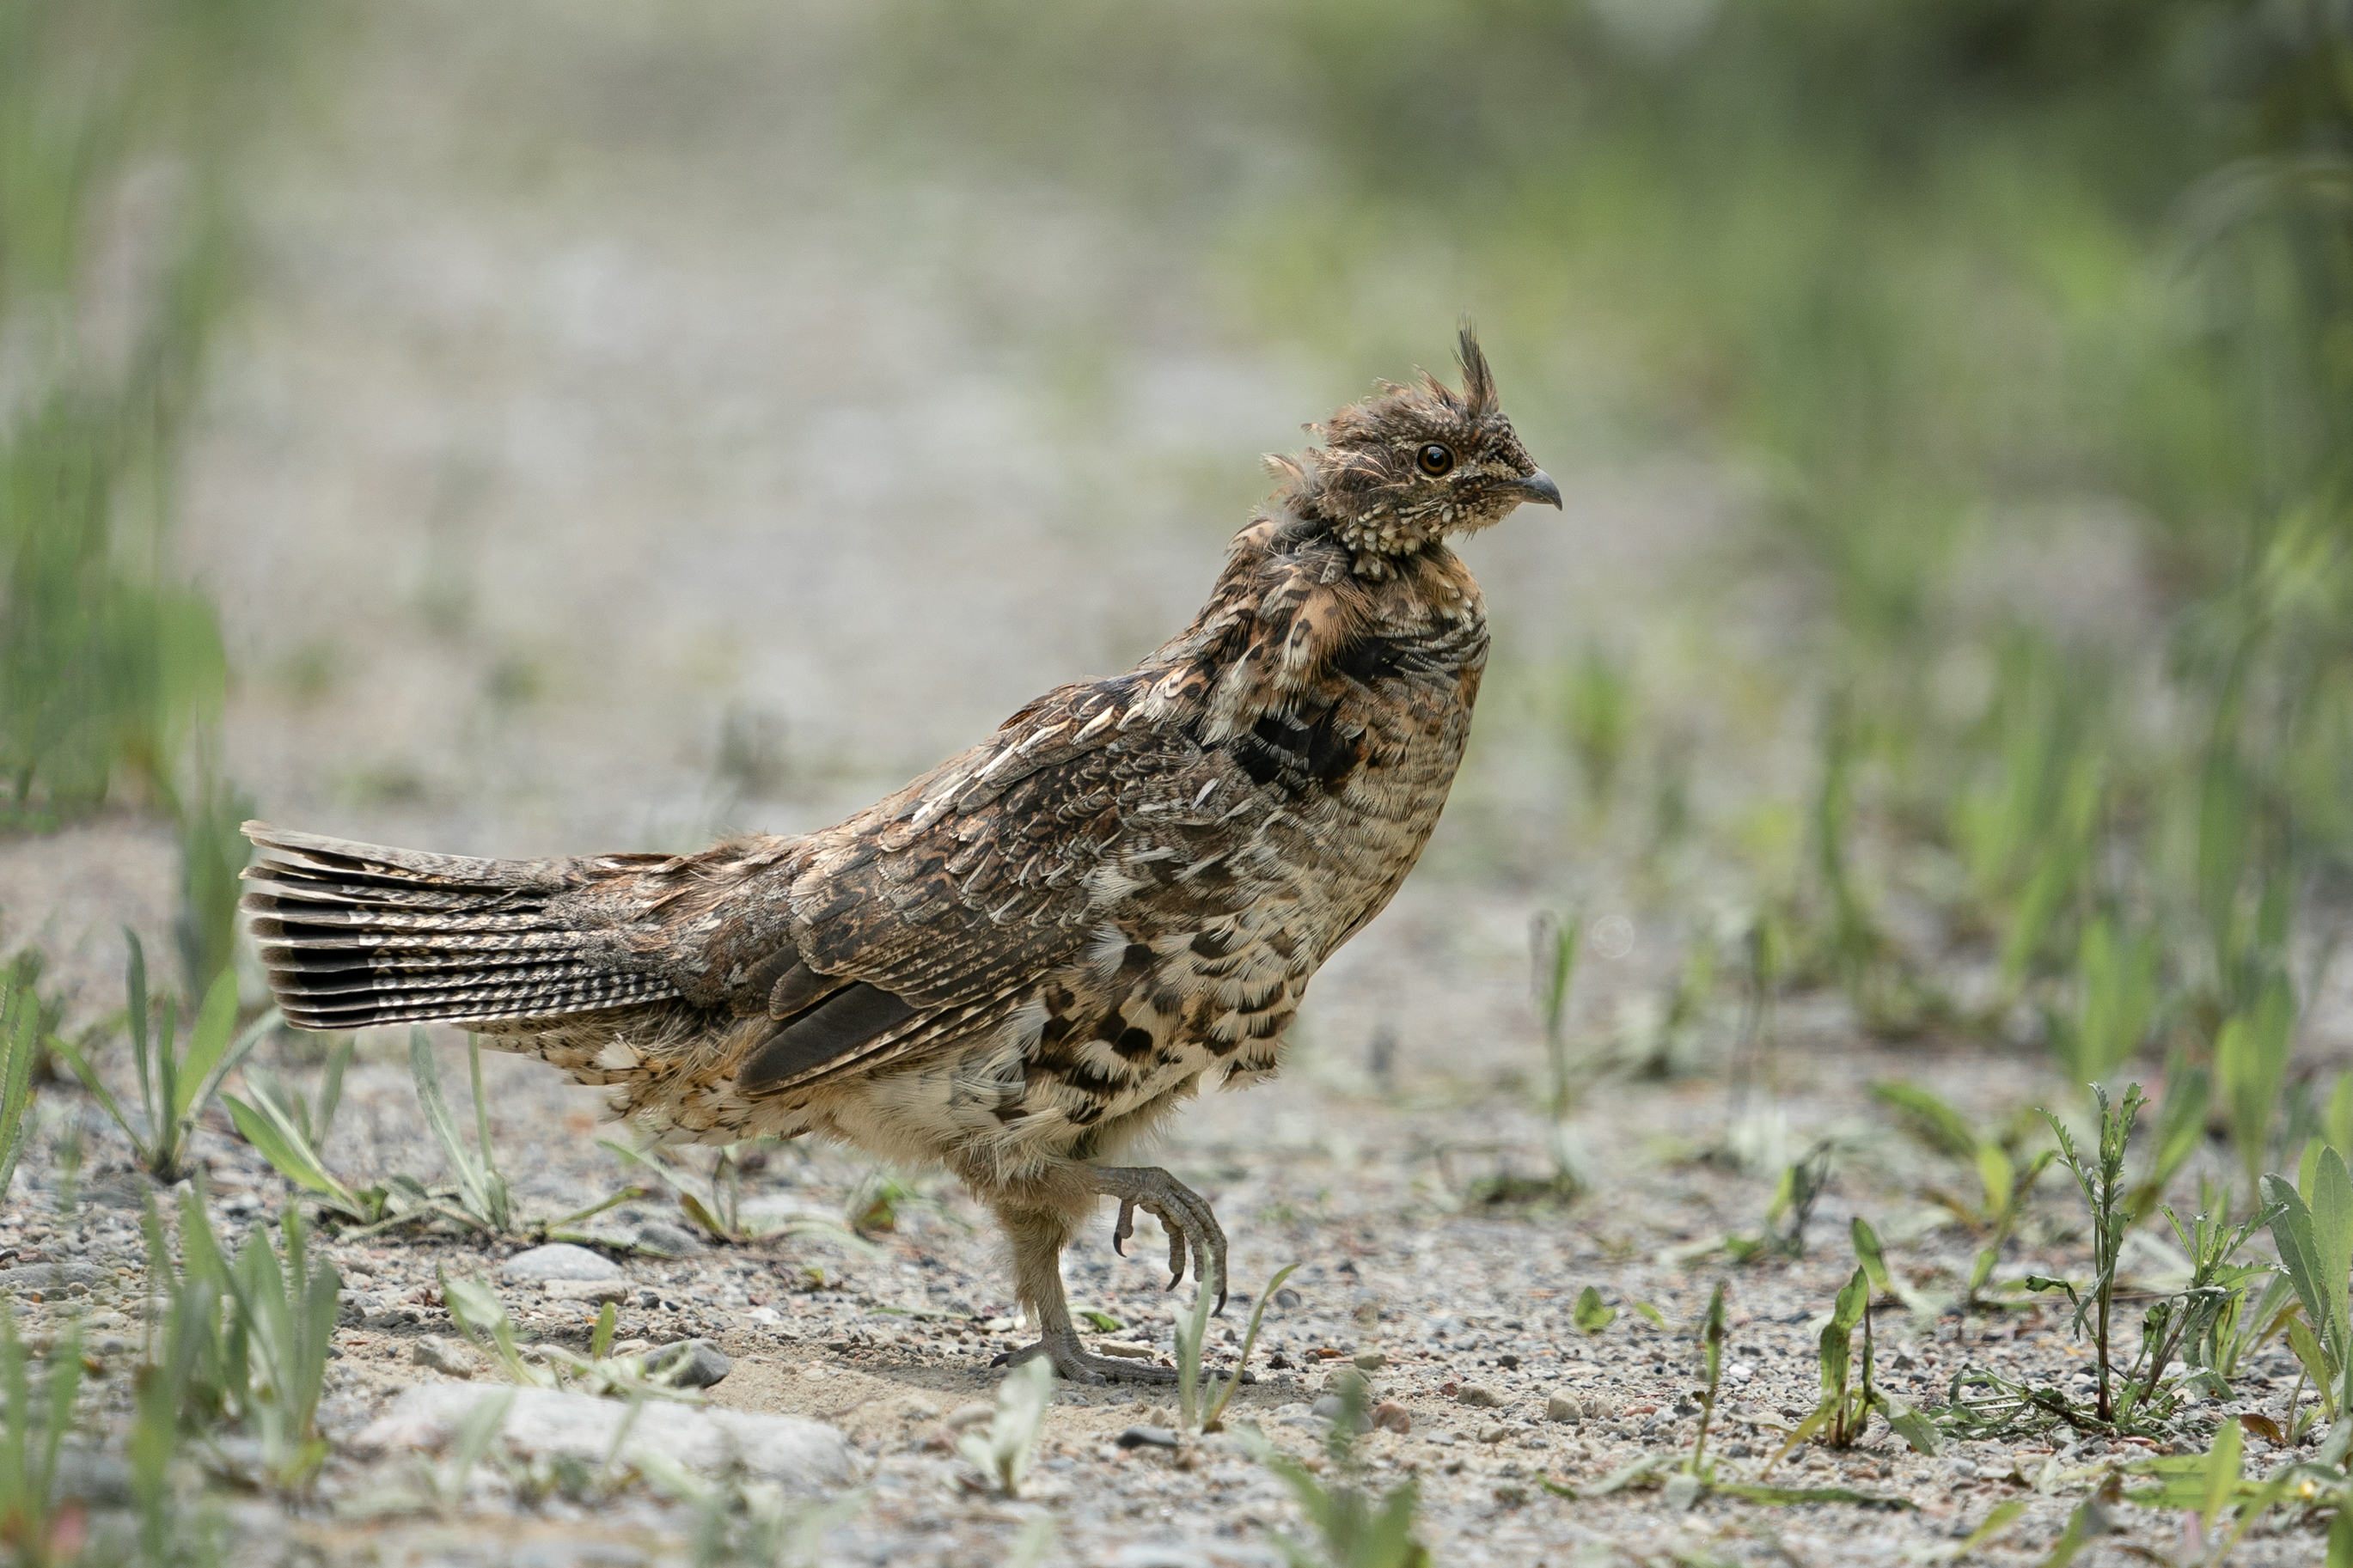 A ruffed grouse marching on the ground